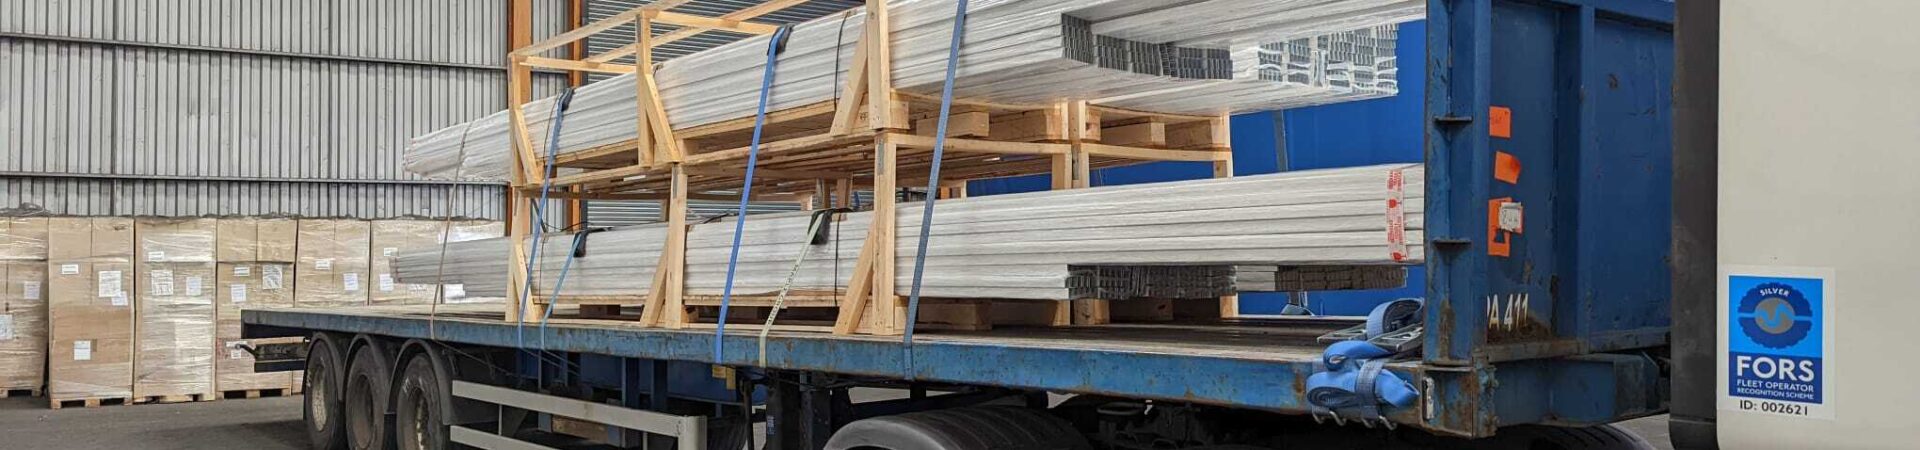 Steel - Stainless / Section / Tubes / Sheet